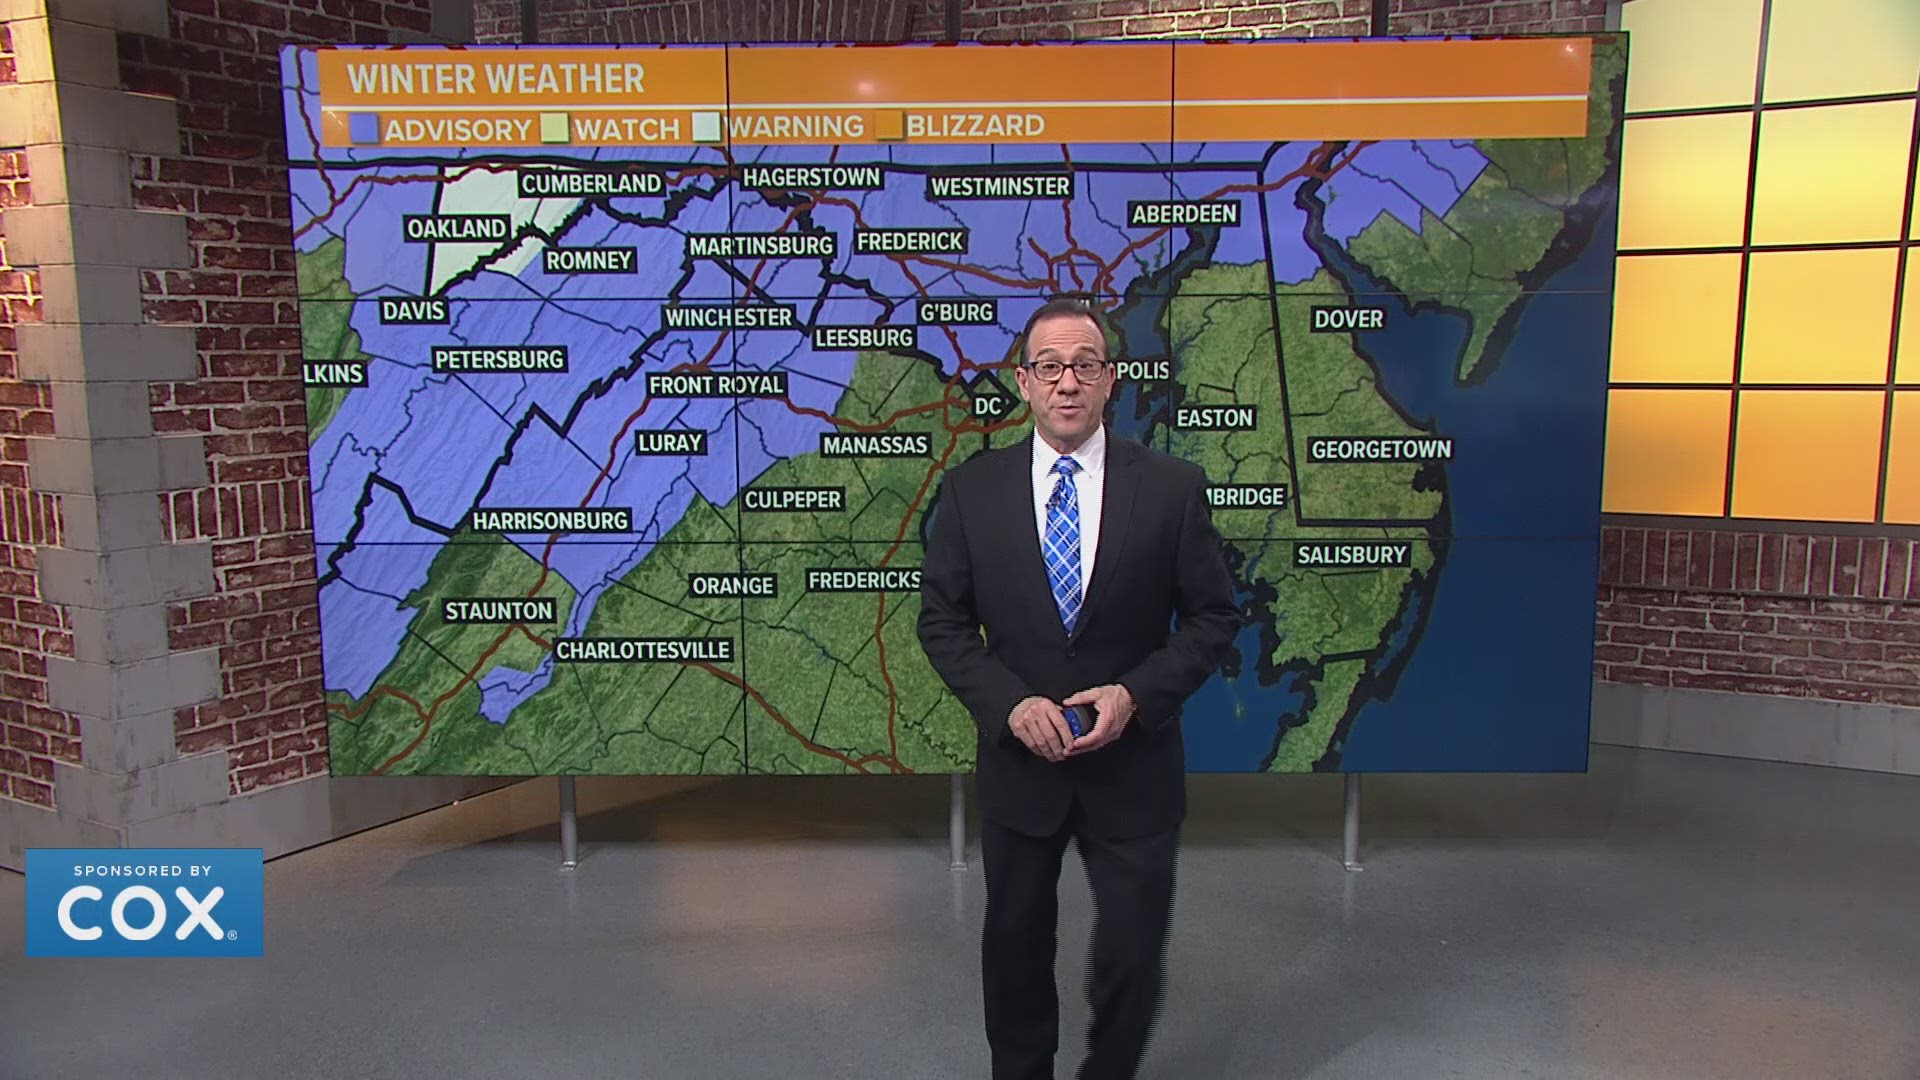 Snow, freezing rain, and rain expected to cause slippery conditions on the roads.